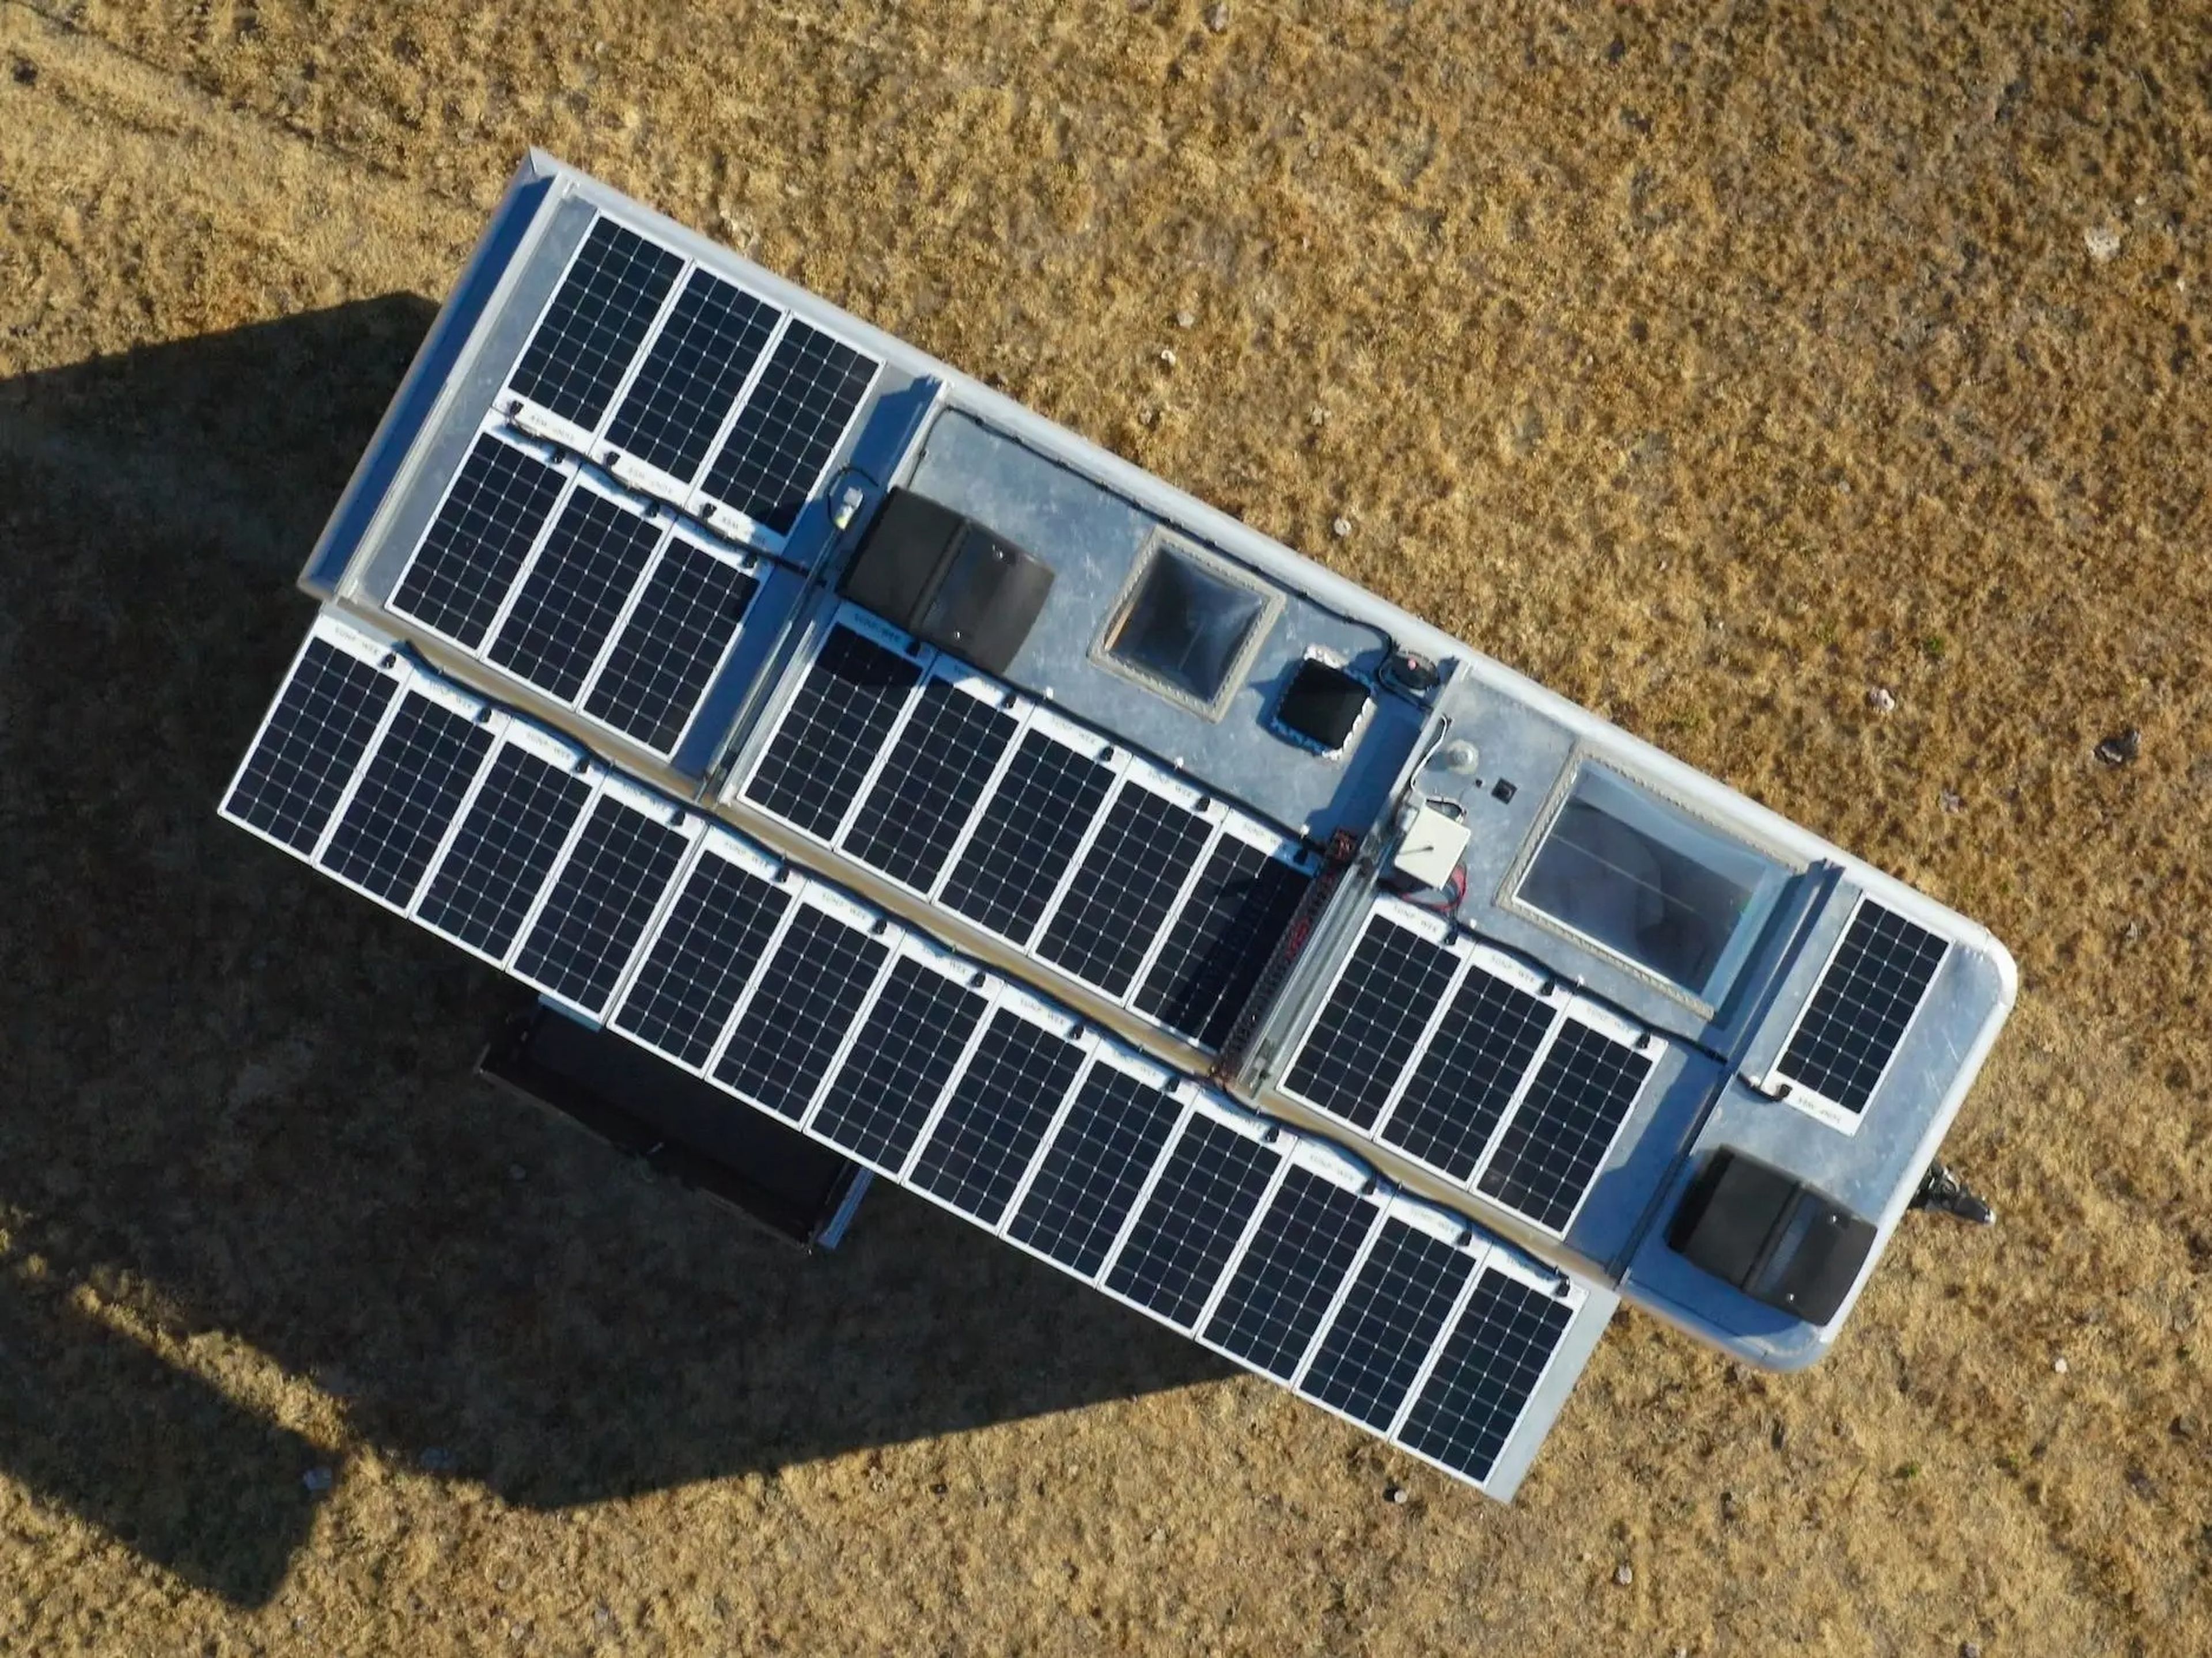 The solar panels on top of the travel trailer as the trailer sits on a field.